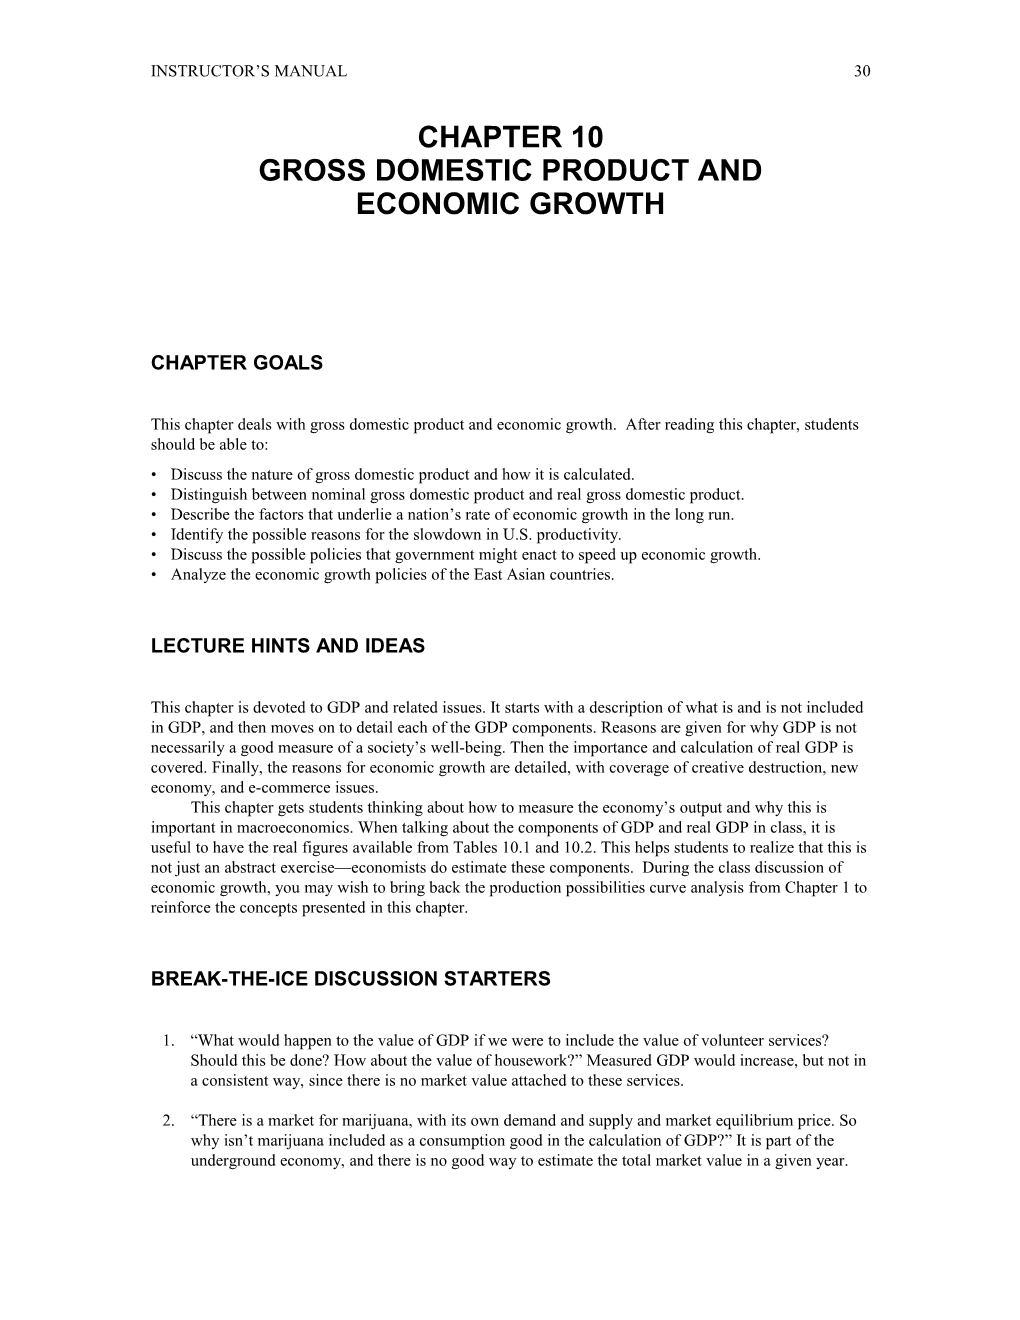 Chapter 10 Gross Domestic Product and Economic Growth